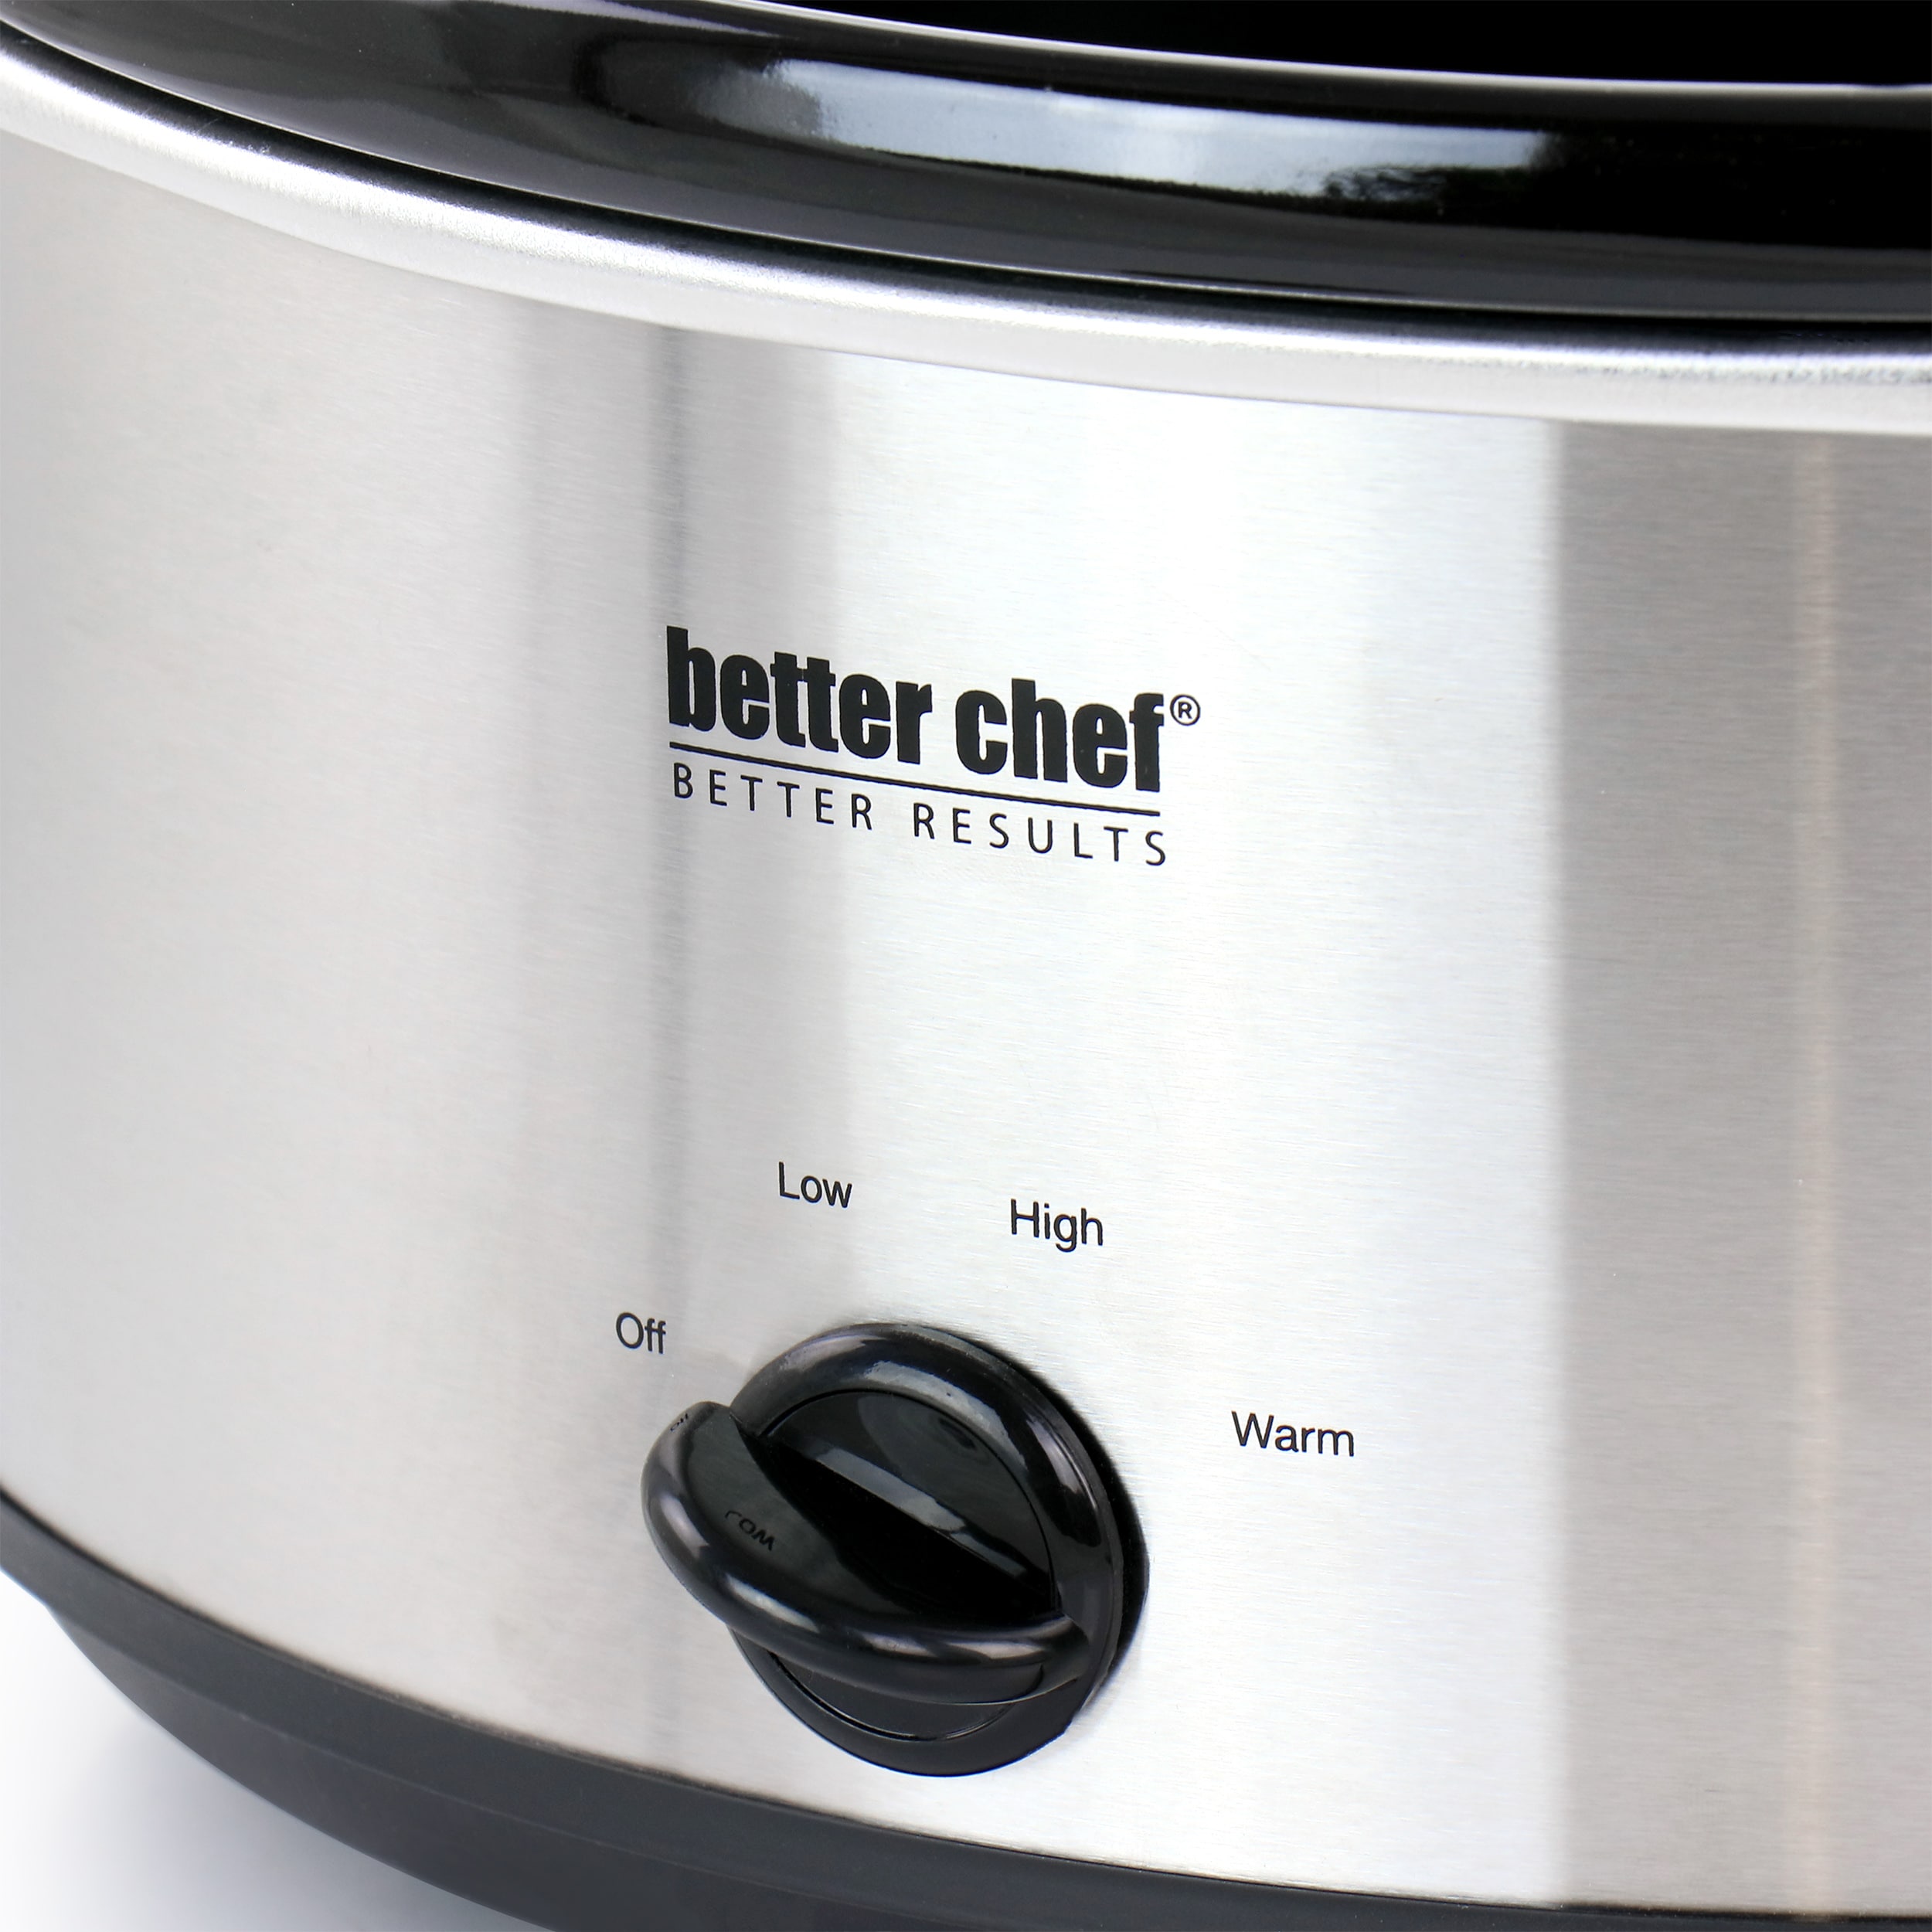 Cuisinart 6.5 Qt. Programmable Stainless Steel Slow Cooker - PSC-650